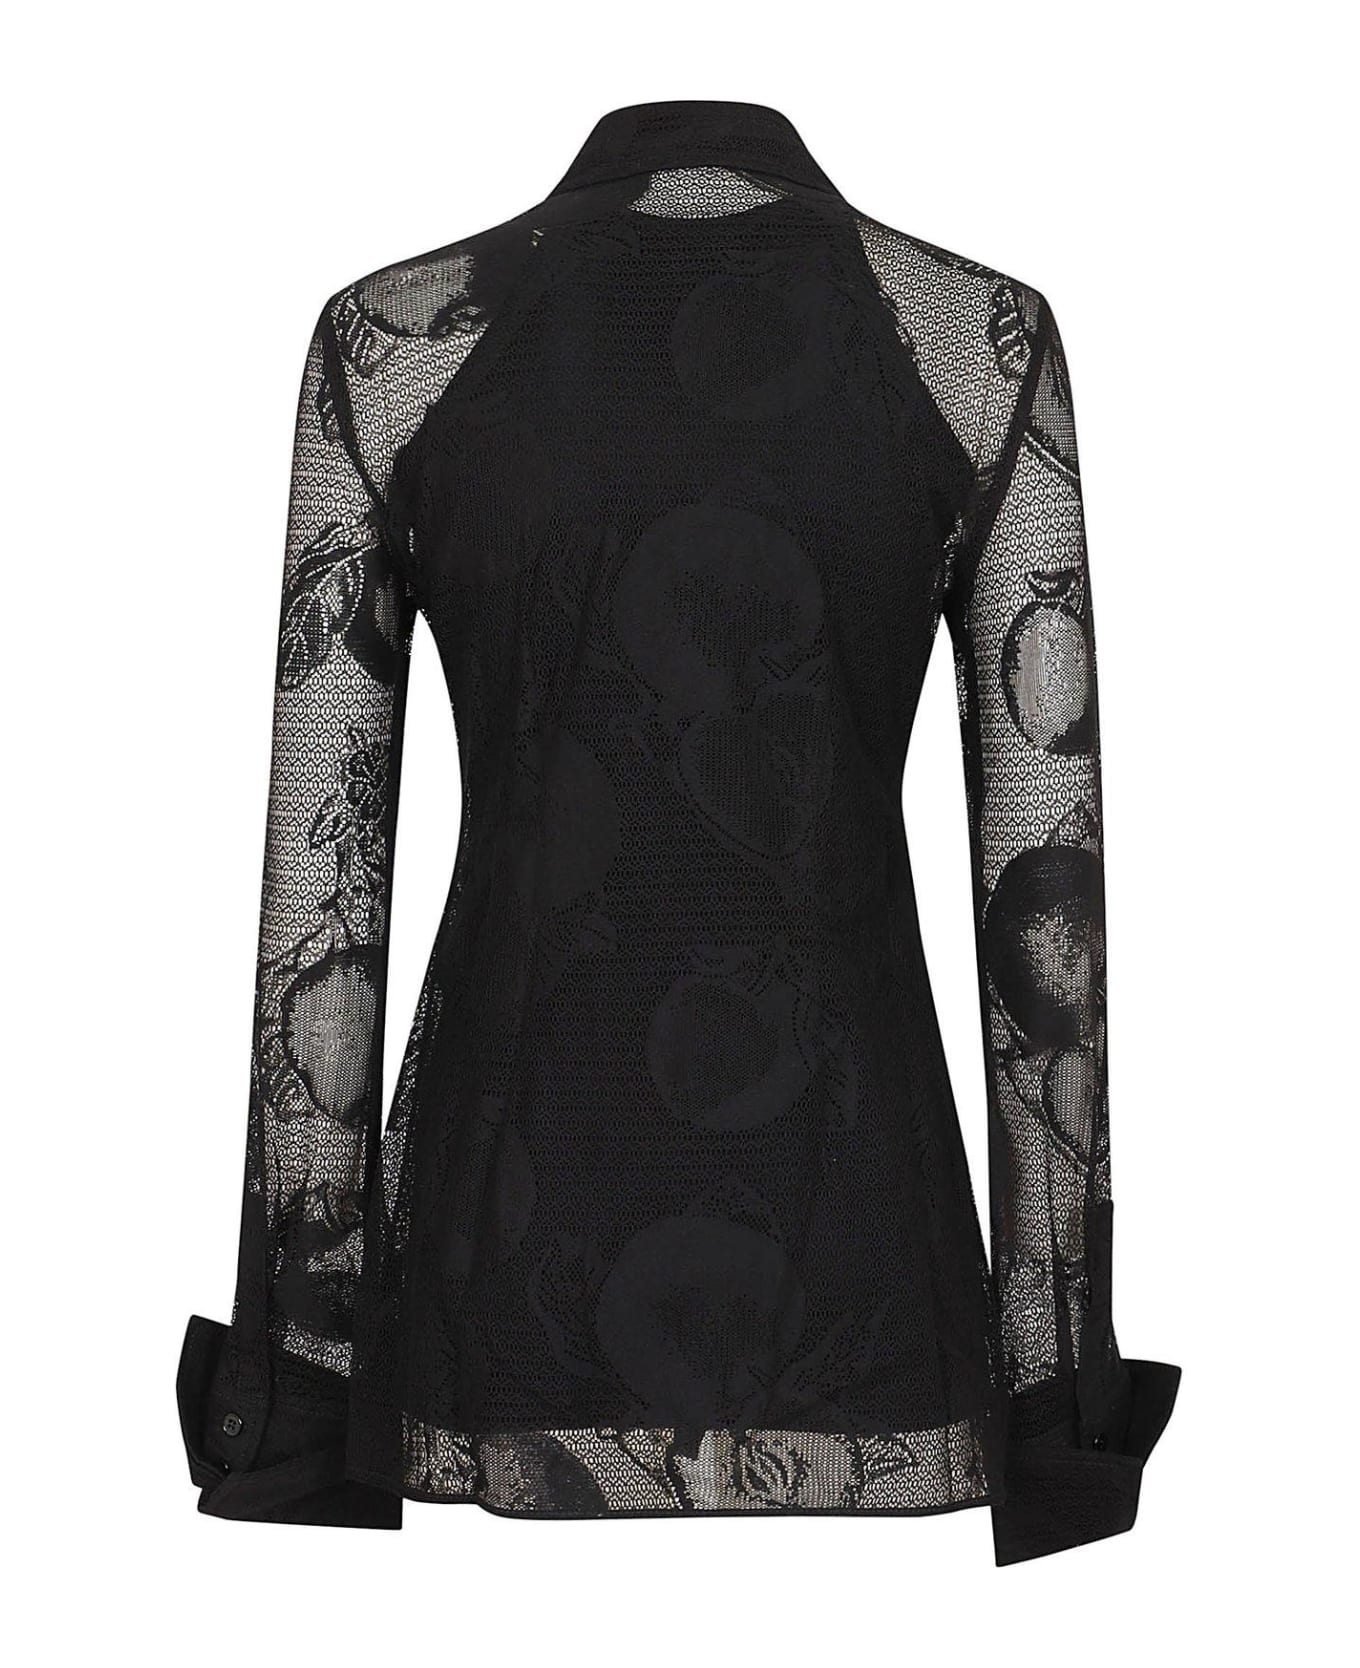 SportMax Lace Detailed Long-sleeved Top - Black